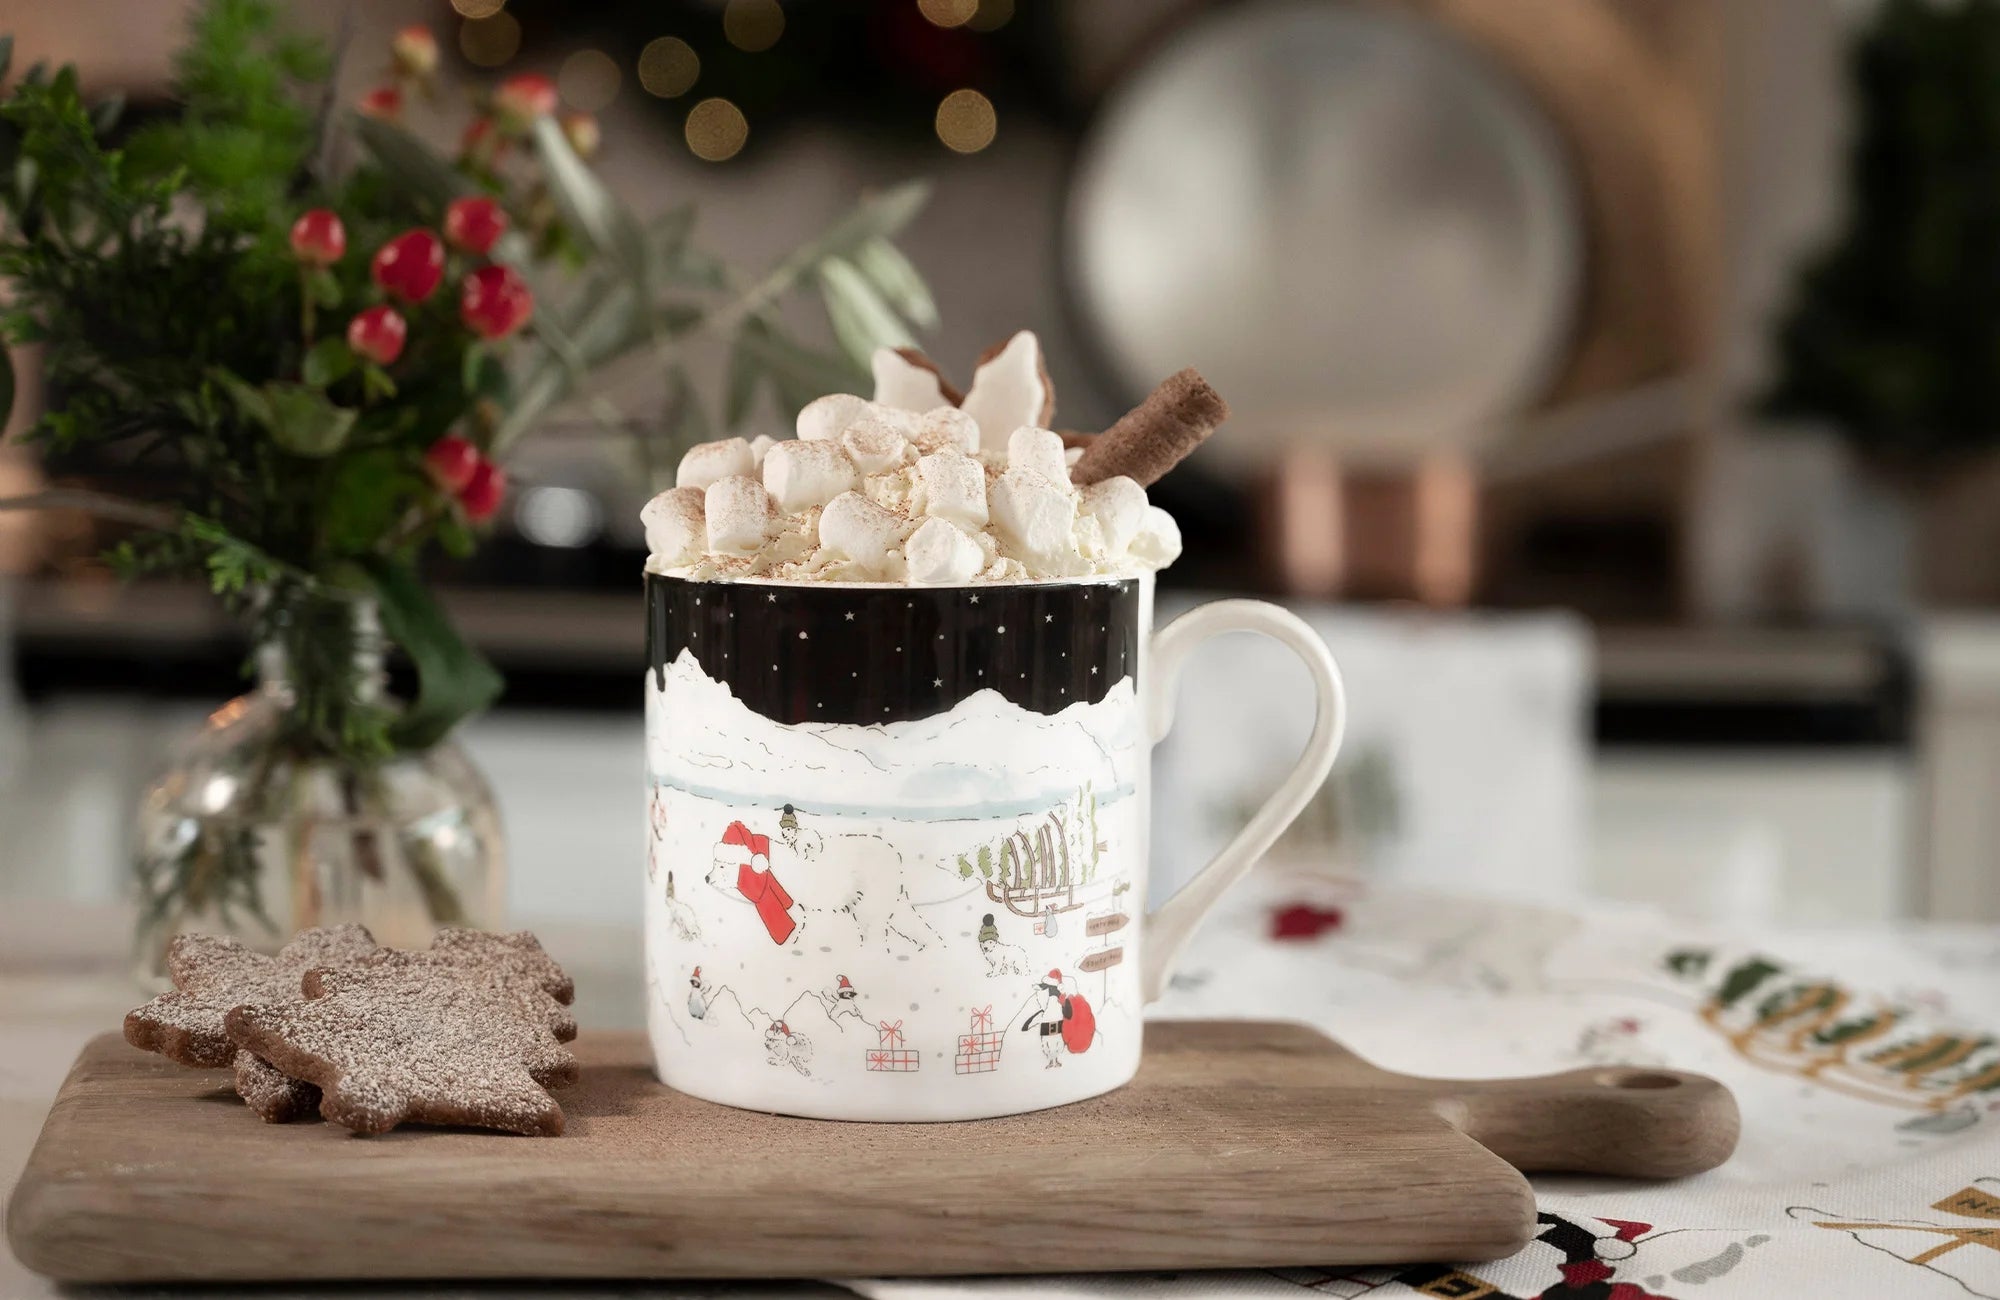 7 Perfect Mugs for Hot Chocolate This Winter